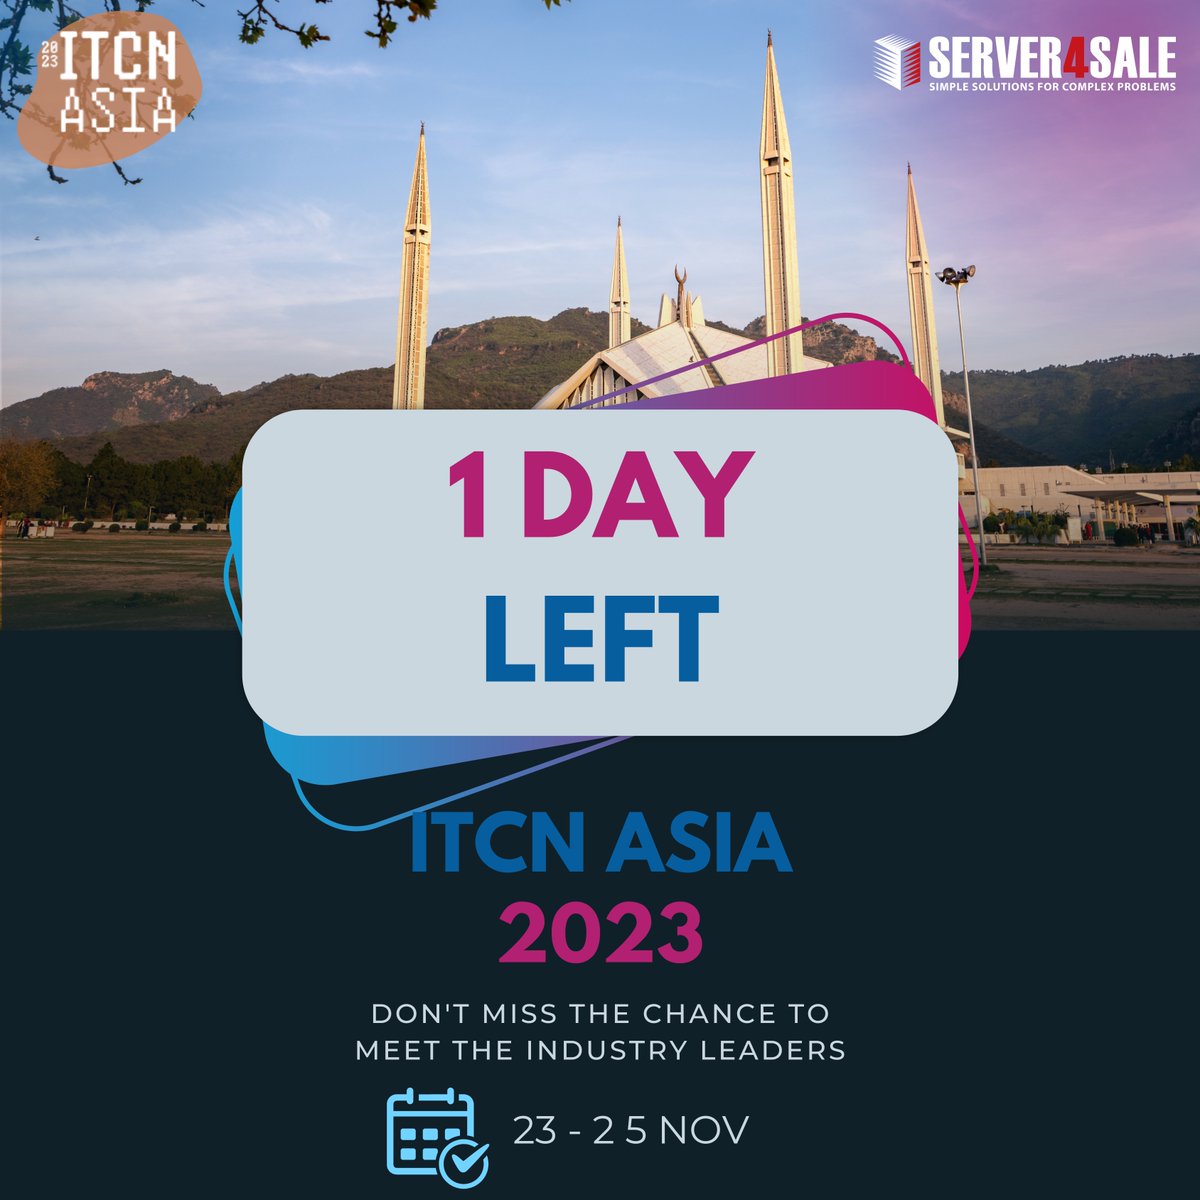 It's the final countdown... There is only one more day until the region's largest IT and telecom show. Don't miss the chance to meet the industry leaders.

#itcnasia #itcnasia23 #islamabad # server4sale #s4s